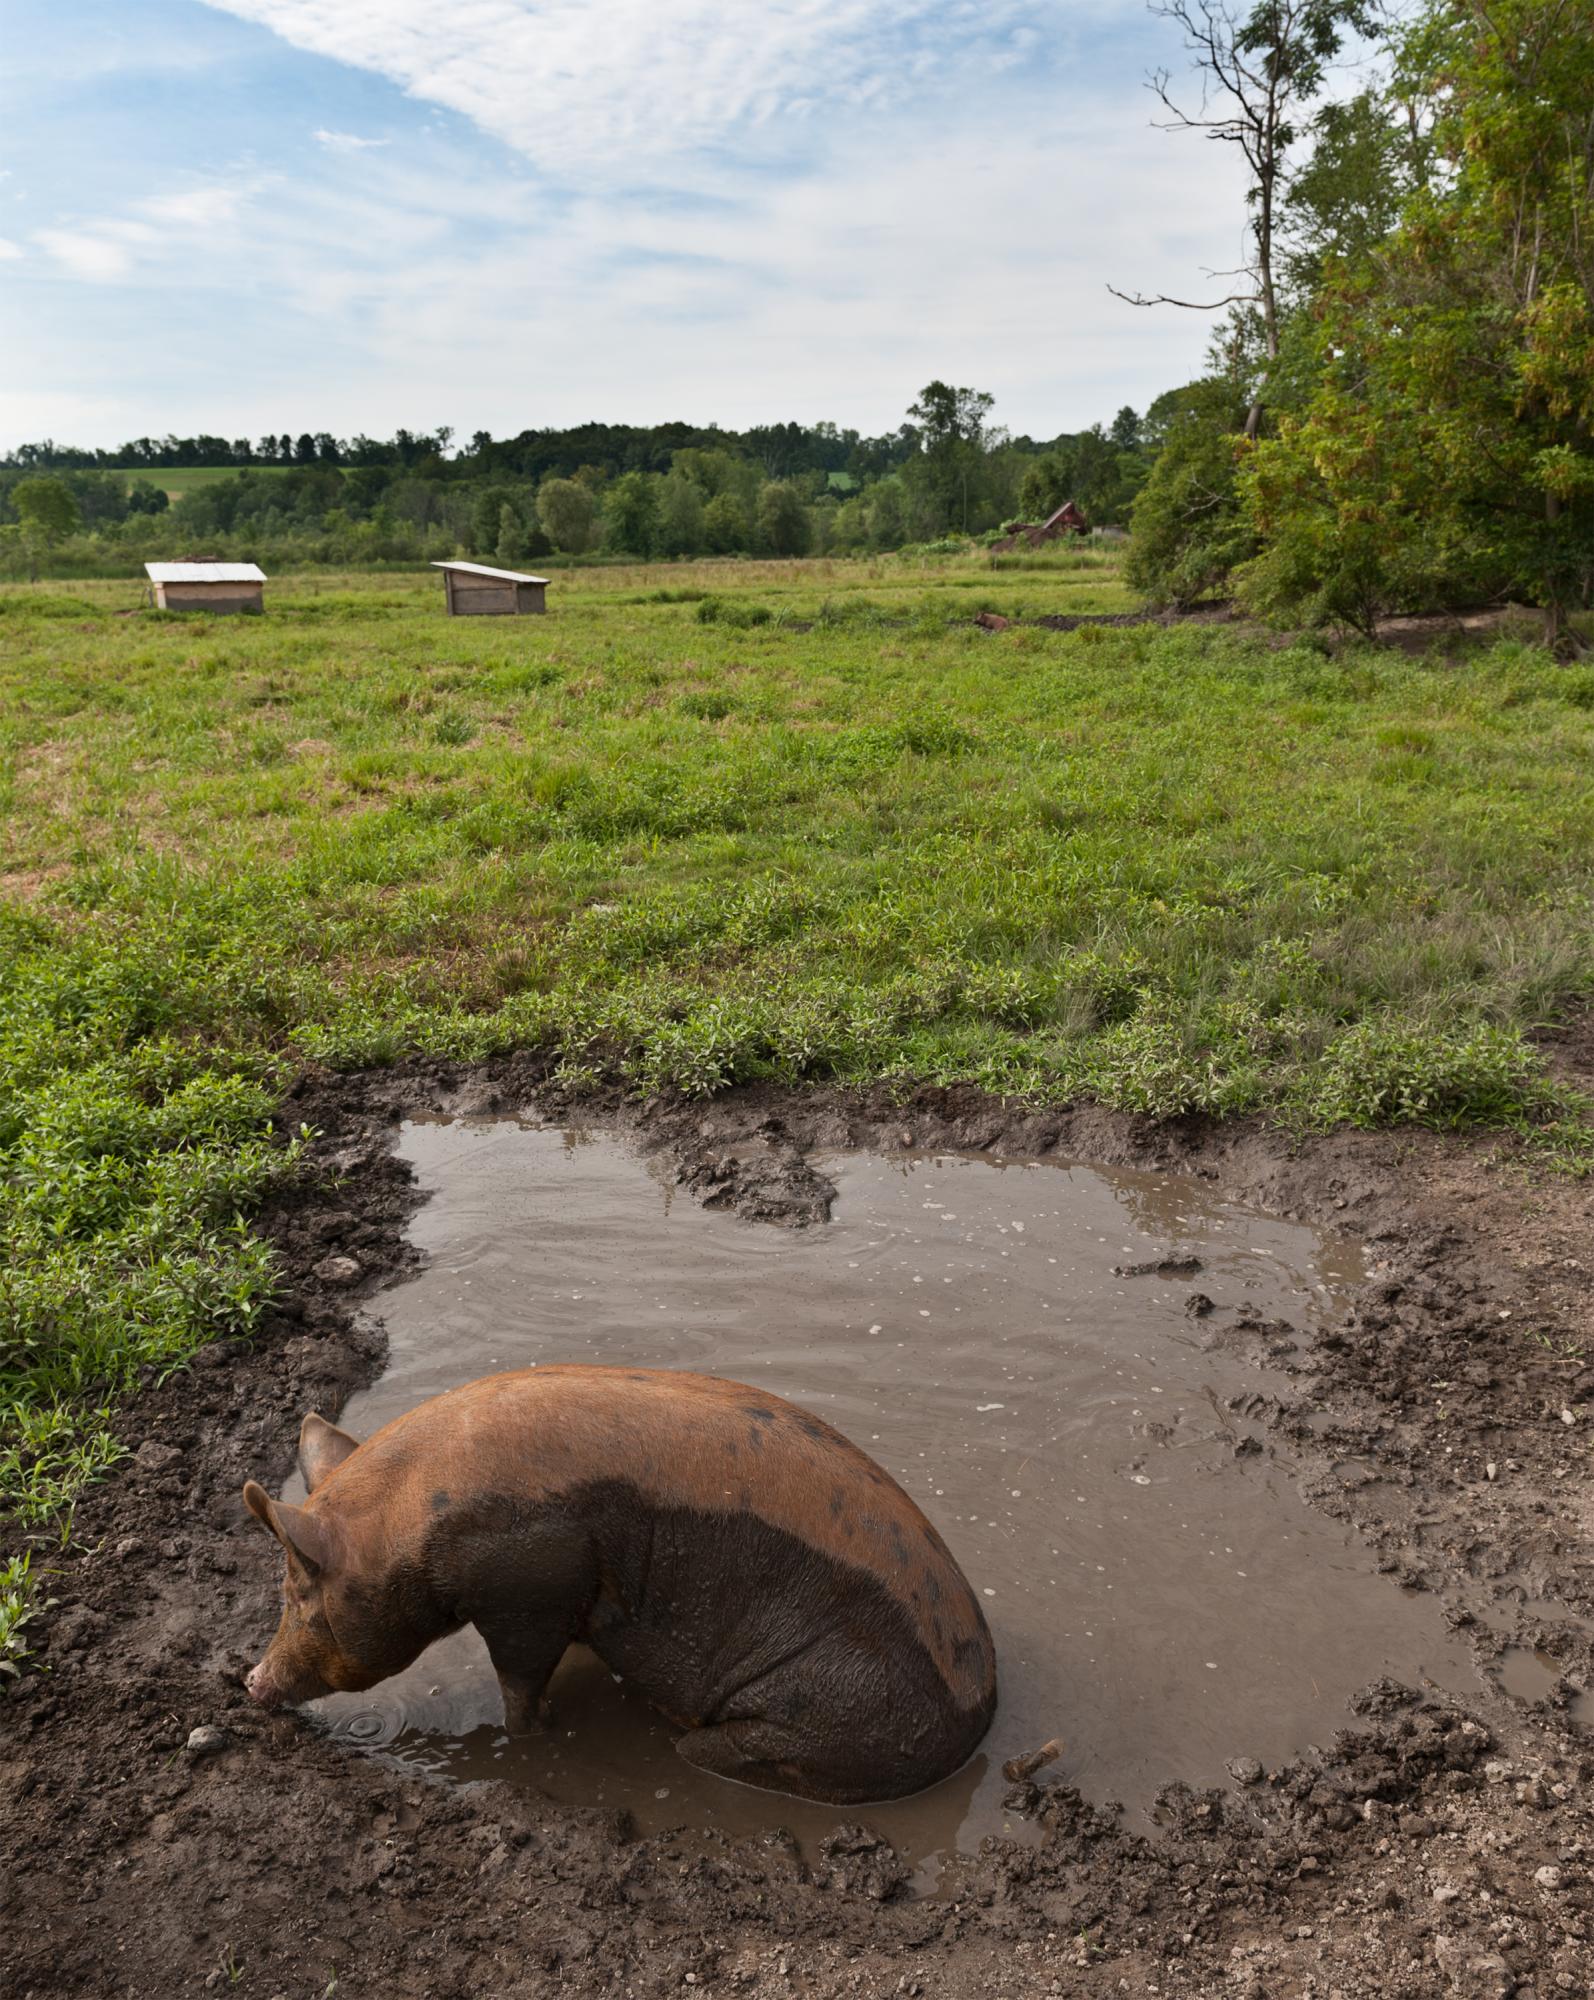 Considered - A sow stays cool in a mud bath, which serves as a natural...